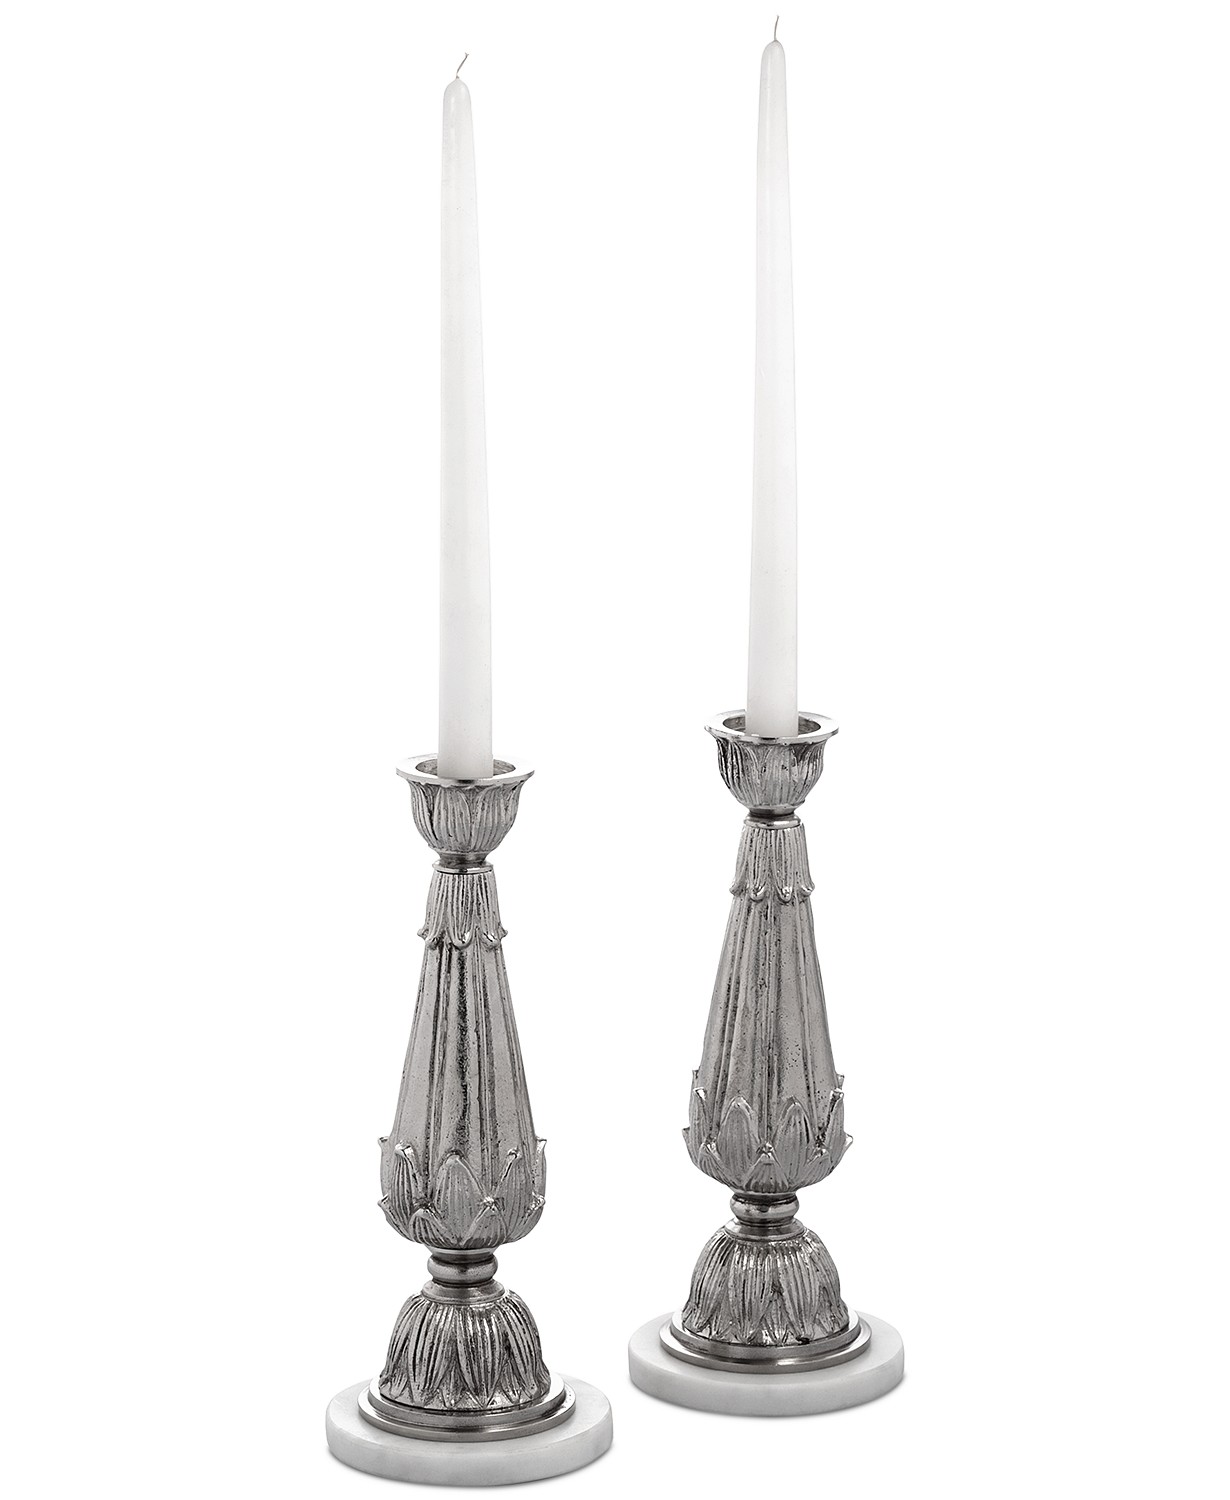 Michael Aram Series Palace Candle Holders Only $169 Shipped! (Reg. $275 ...